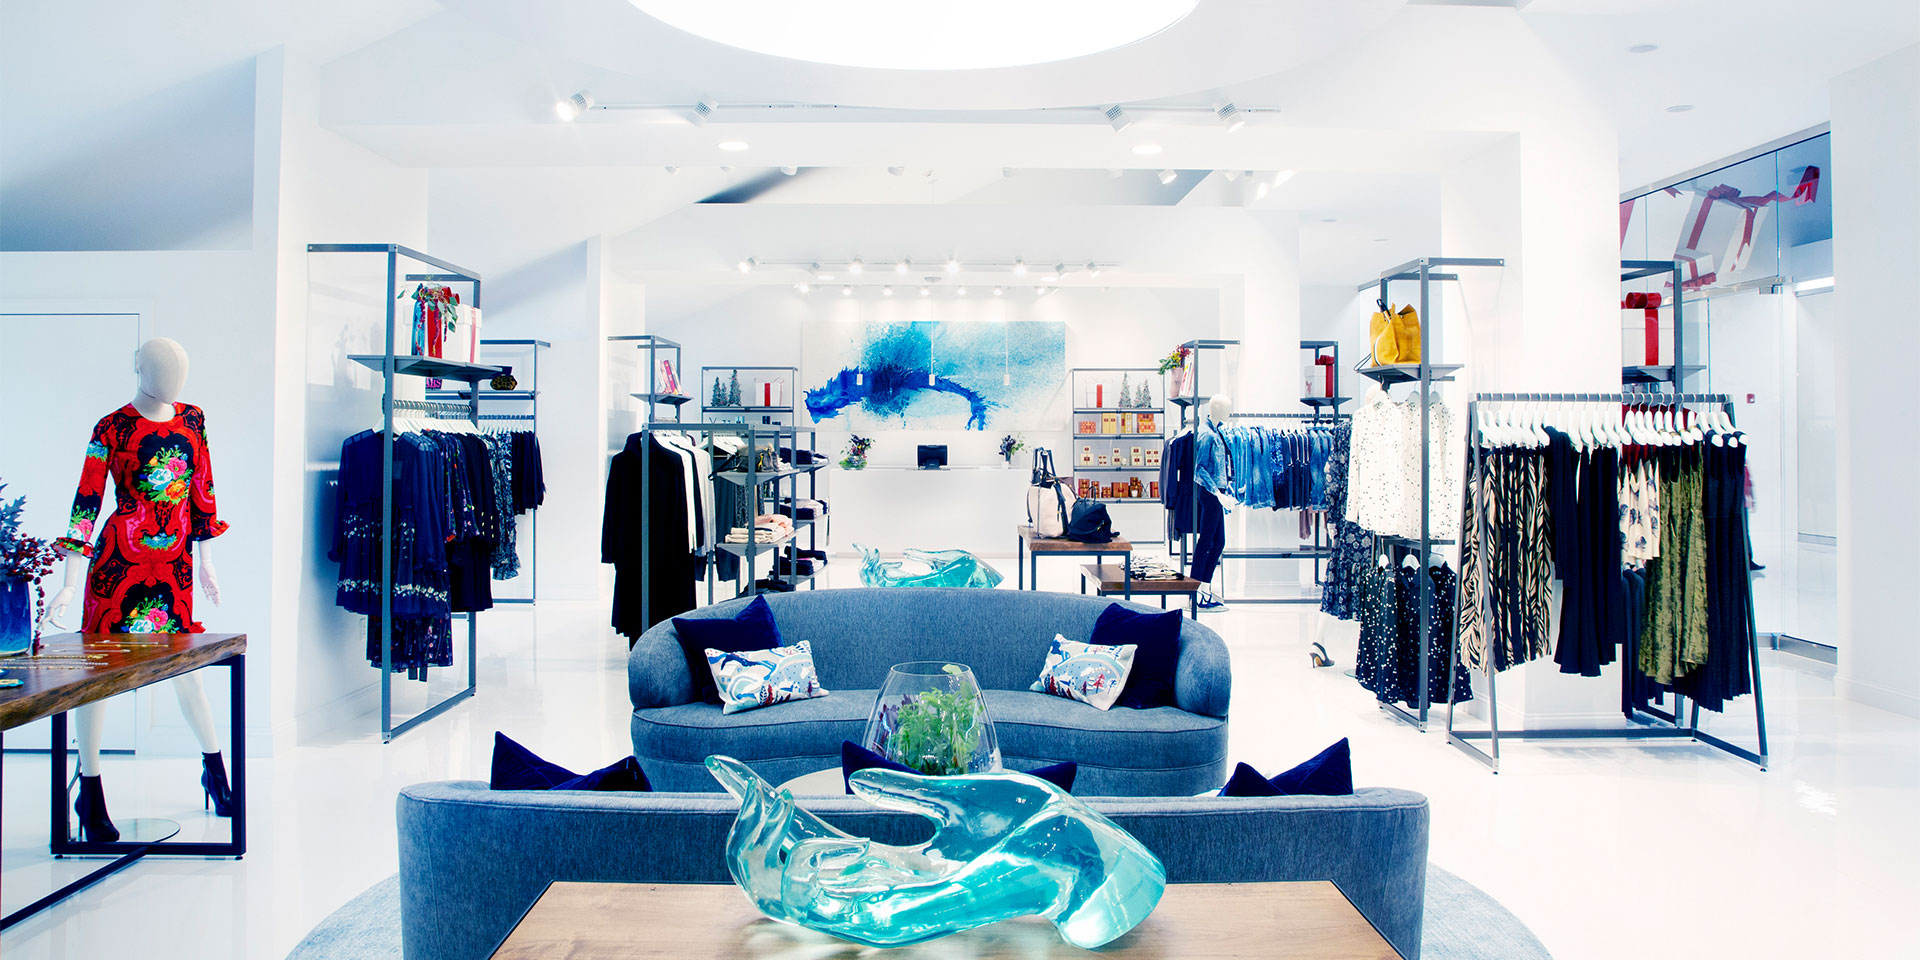 interior of a white fancy clothing store with blue couches